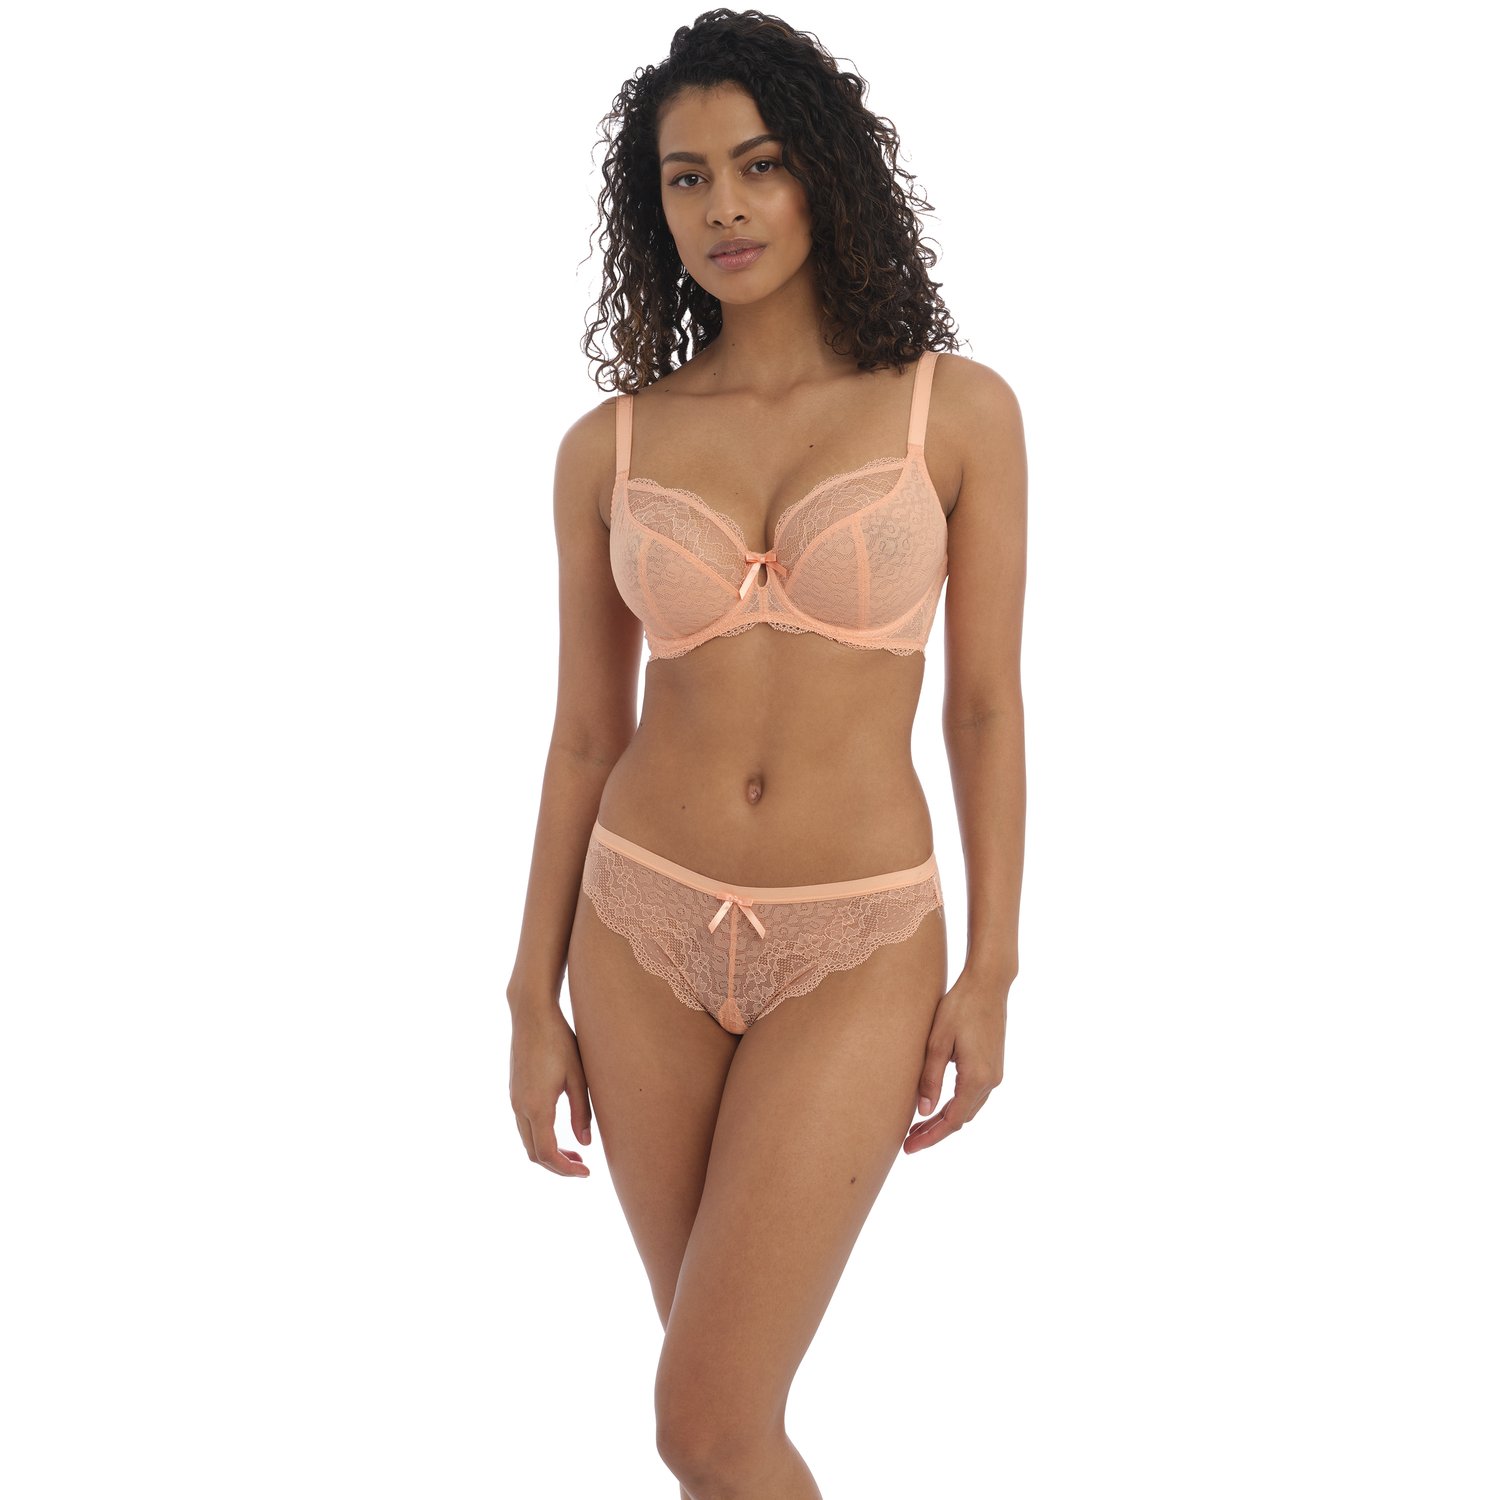 Freya Tailored Moulded Plunge Bra AA401131 Natural Beige